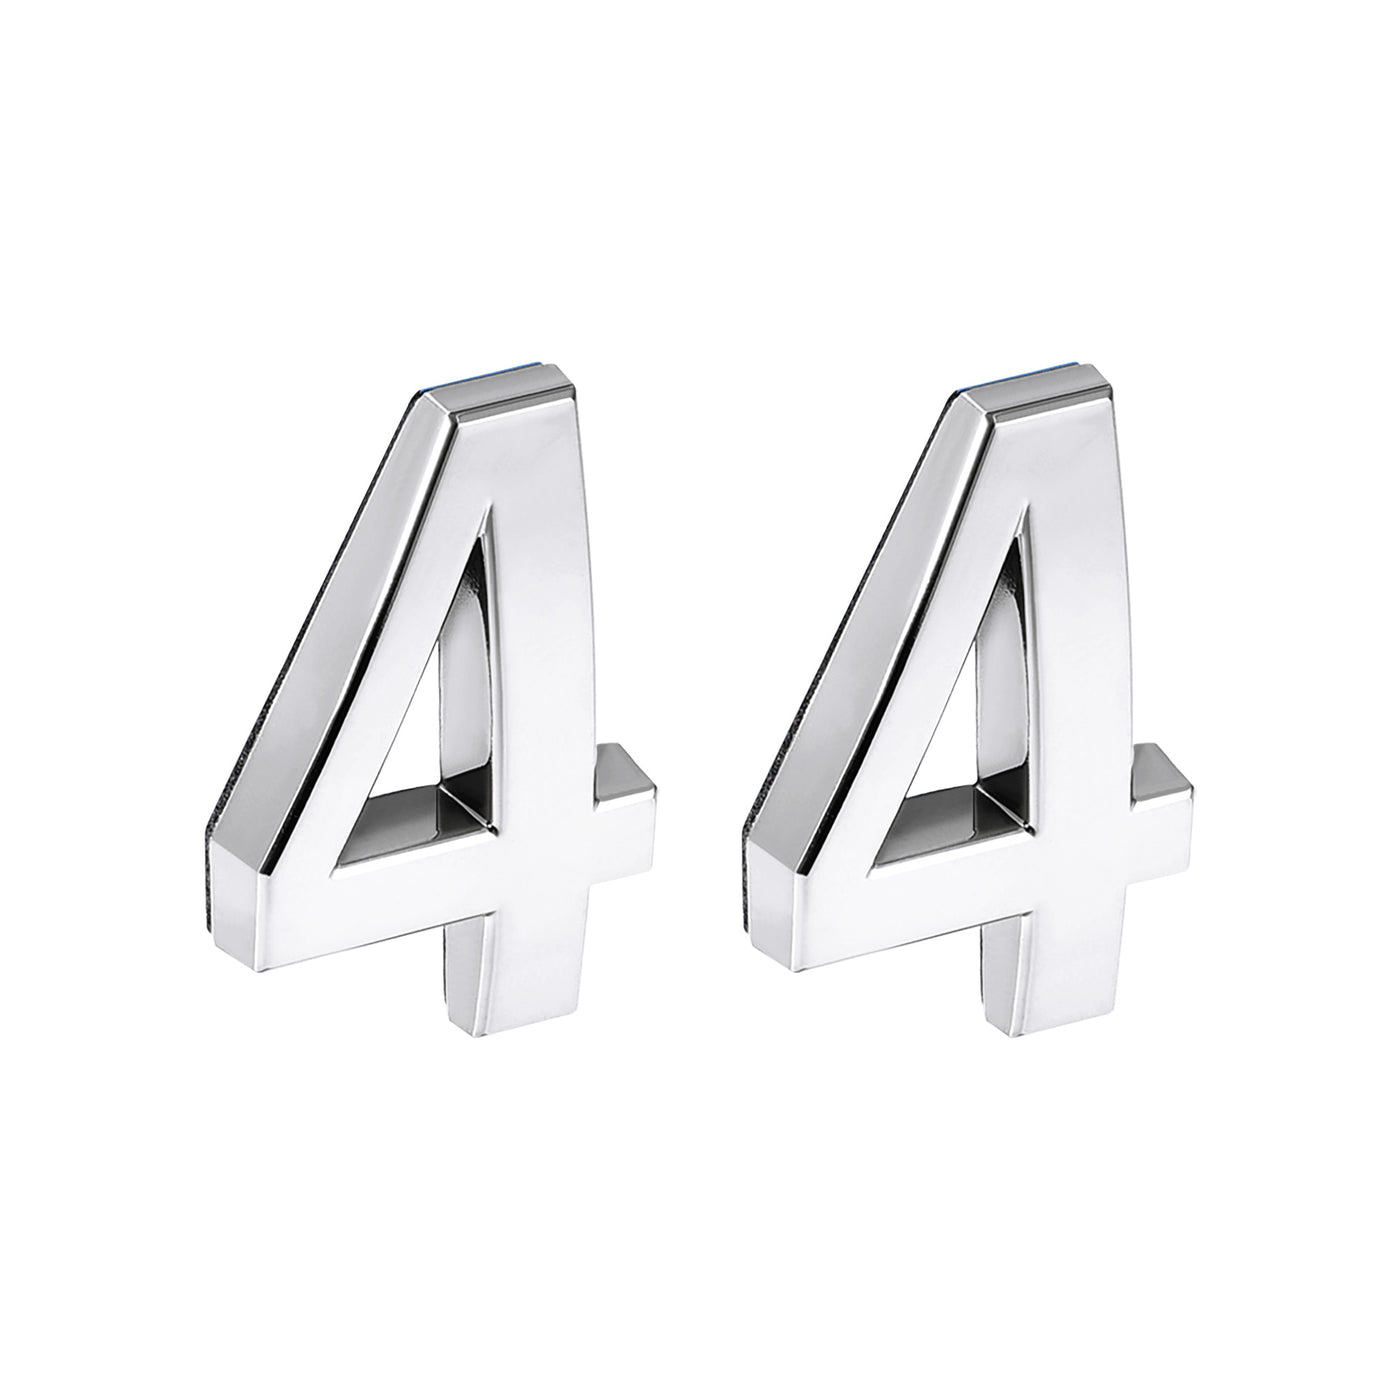 Uxcell Uxcell Self Adhesive House Number, 2.76 Inch ABS Plastic Number 5 for House Hotel Mailbox Address Sign Silver Tone 2 Pcs